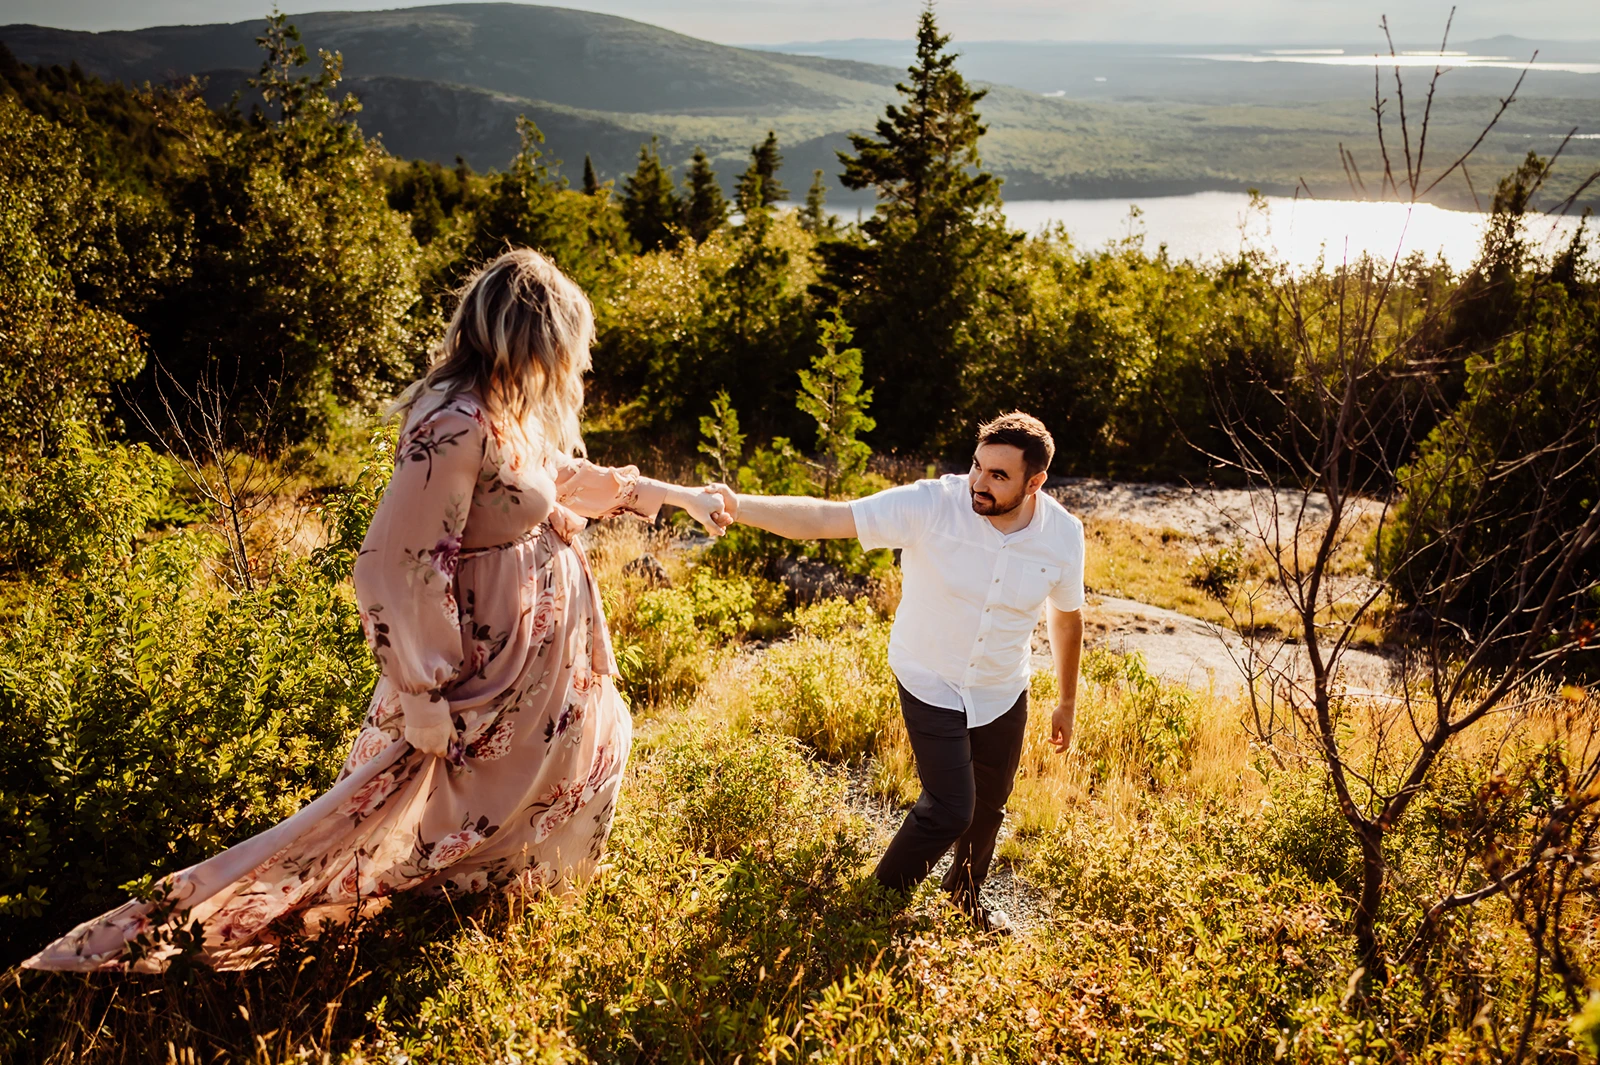 Man leading woman wearing pink floral dress down path on cadillac mountain